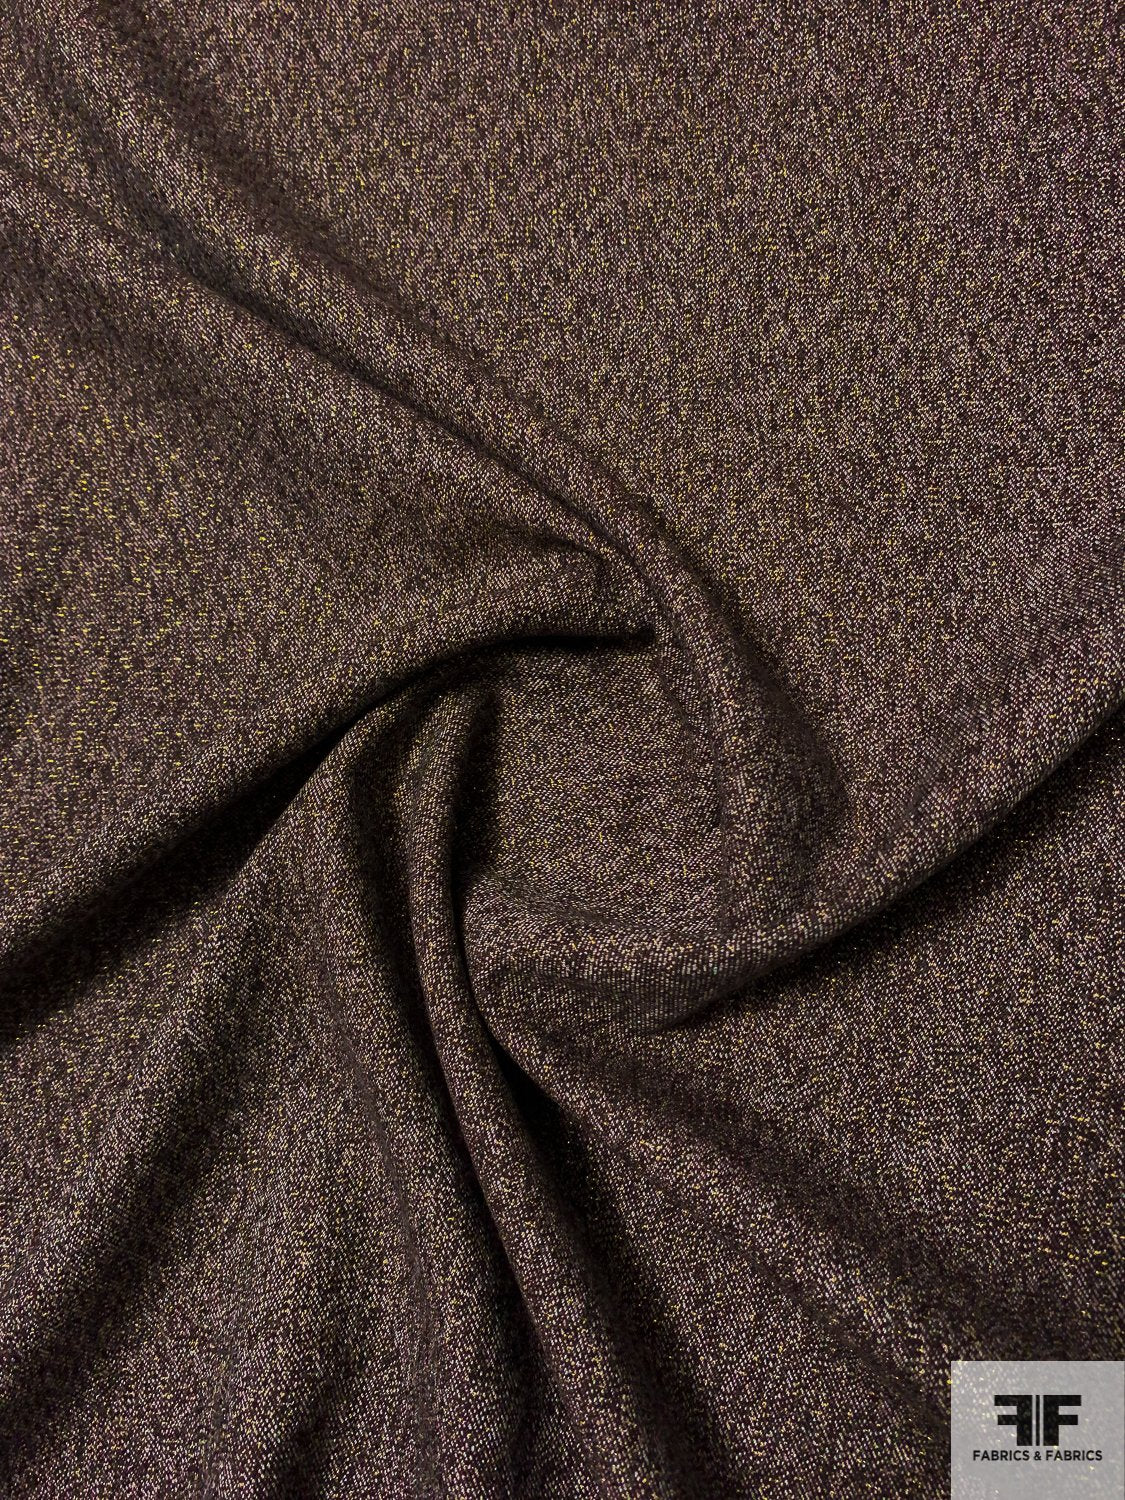 Italian Sparkle Wool Suiting with Lurex Fibers - Brown / Lilac / Gold